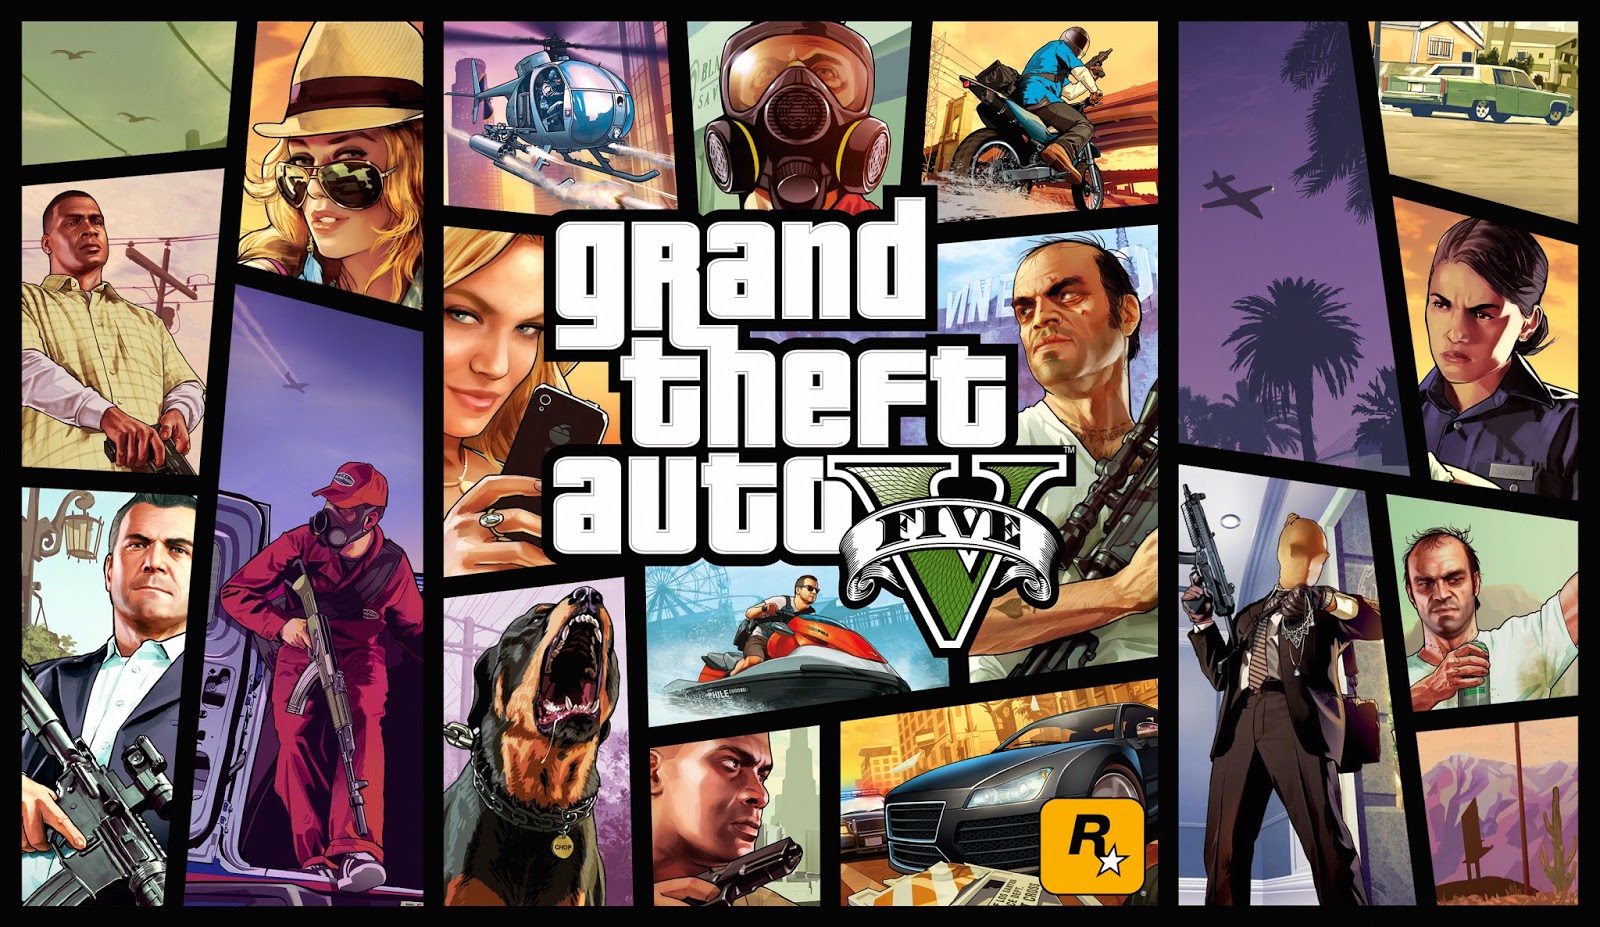 Gta 5 pc download full game iso